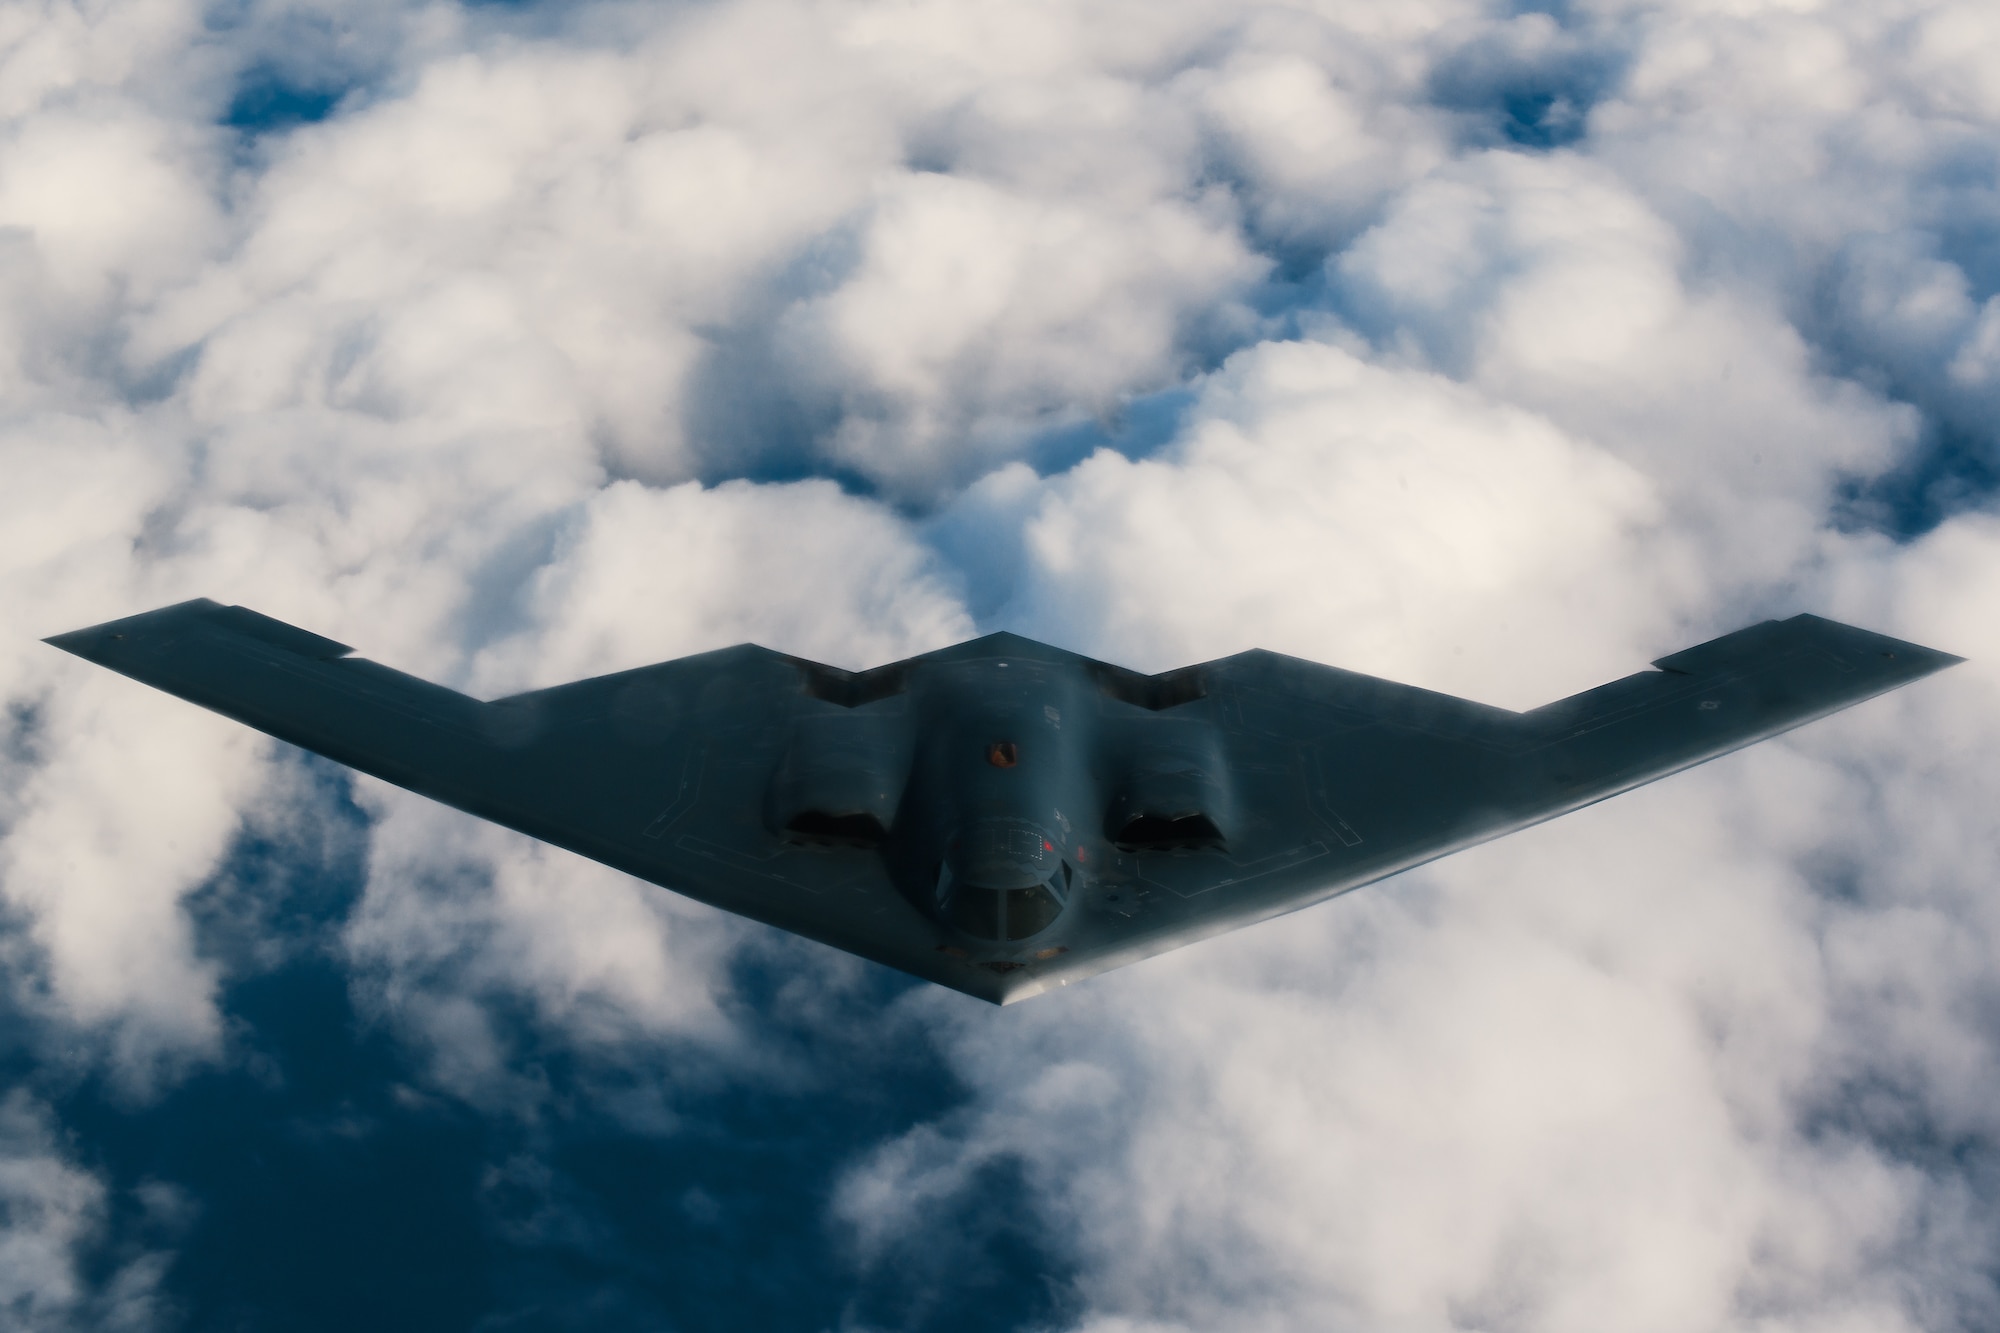 A U.S. Air Force 509th Bomb Wing B-2 Spirit approaches a 351st Aerial Refueling Squadron KC-135 Stratotanker during the Bomber Task Force training exercise over England, Aug. 29, 2019.